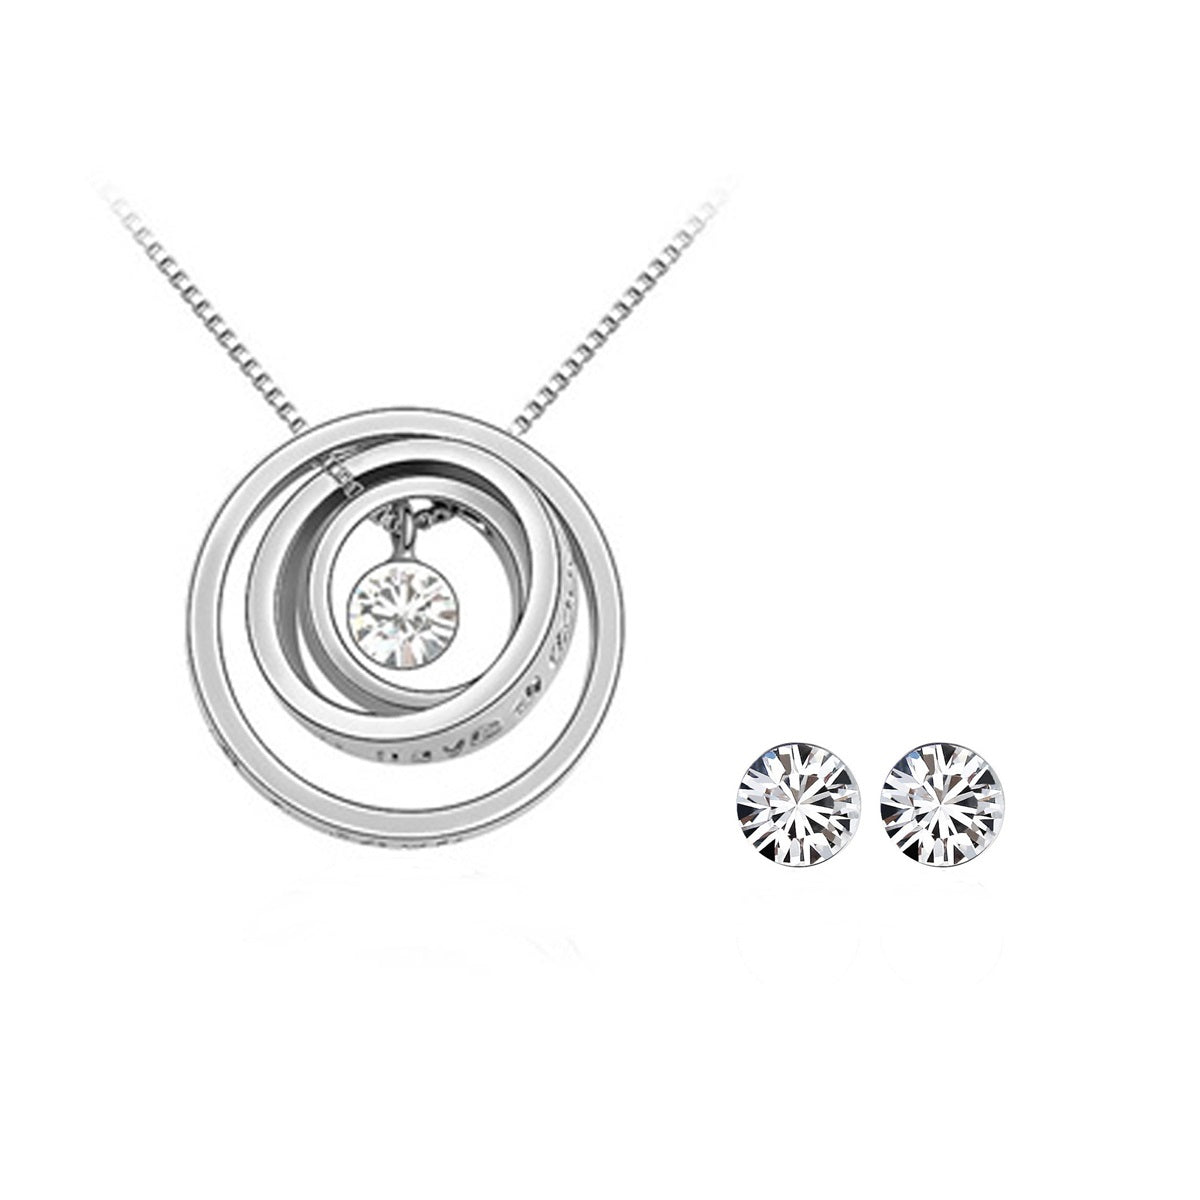 White Jewelry Set - Triple Rings Pendant Necklace and Earrings